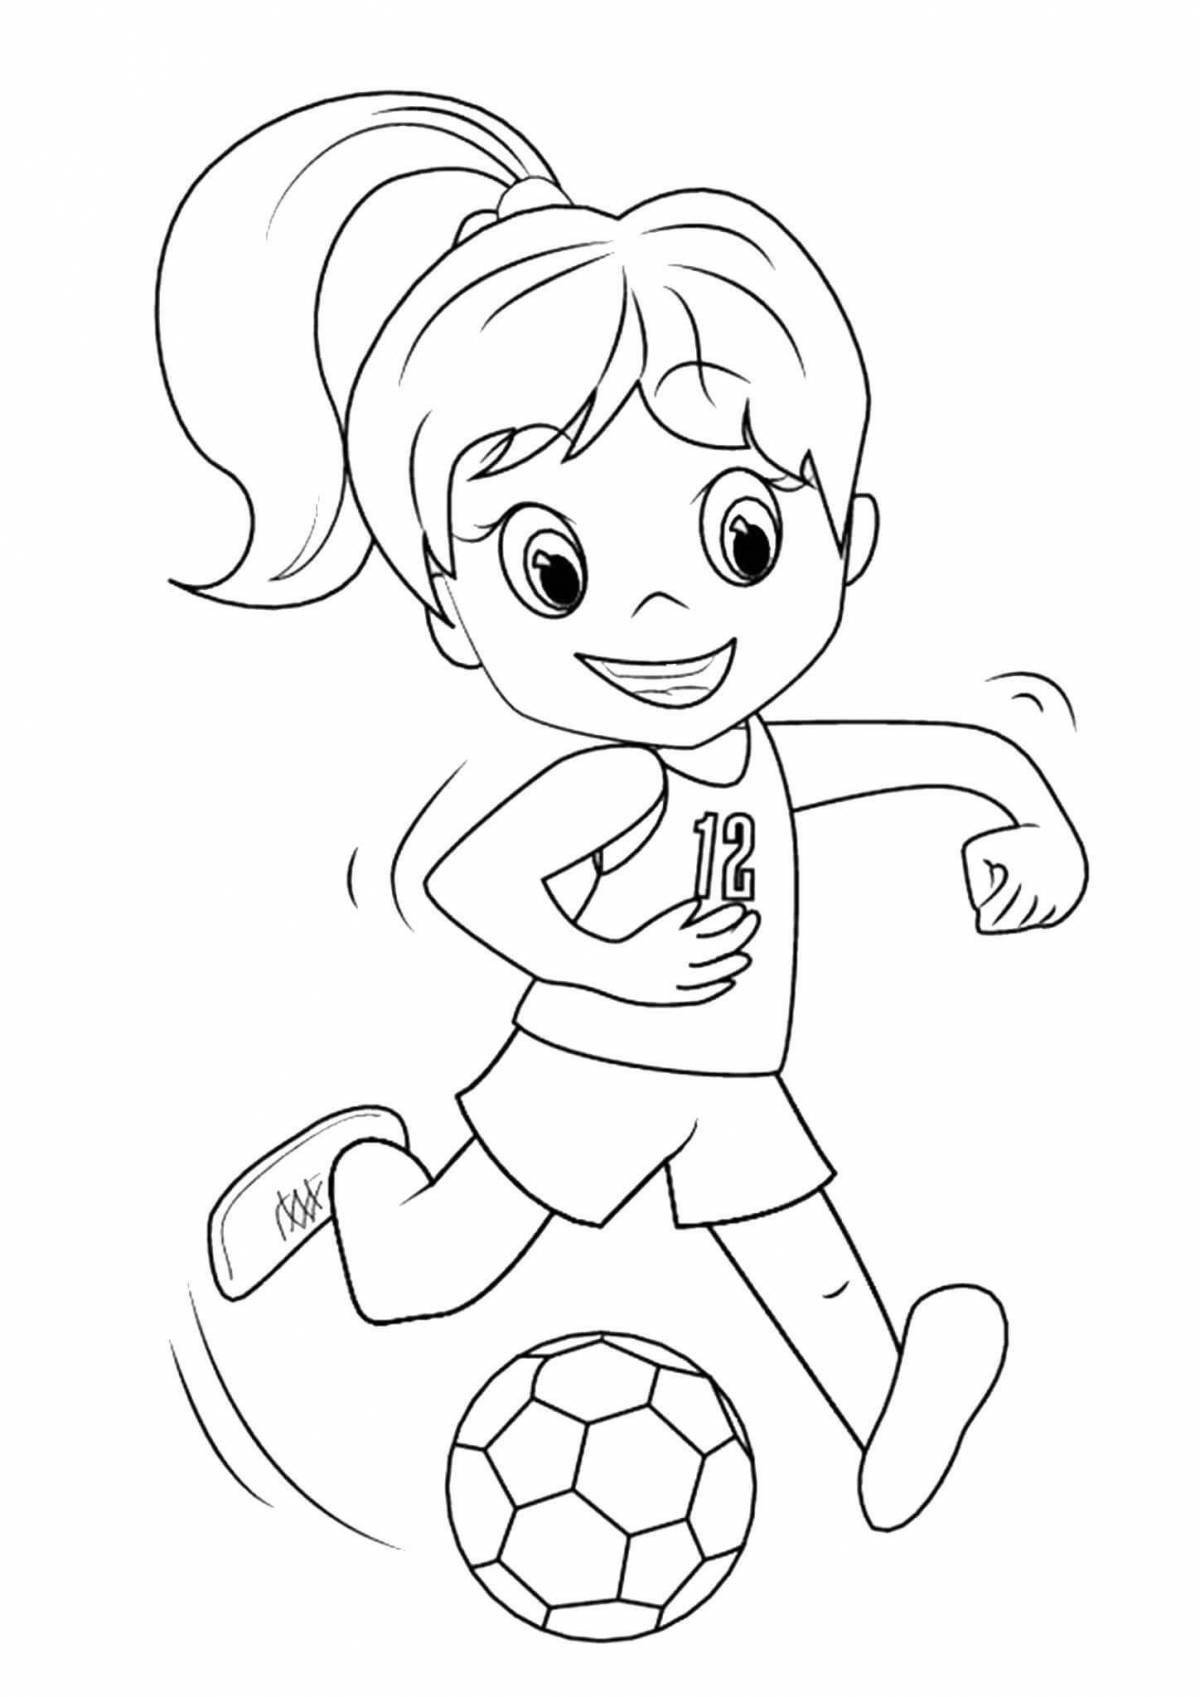 Great sports coloring book for 4-5 year olds